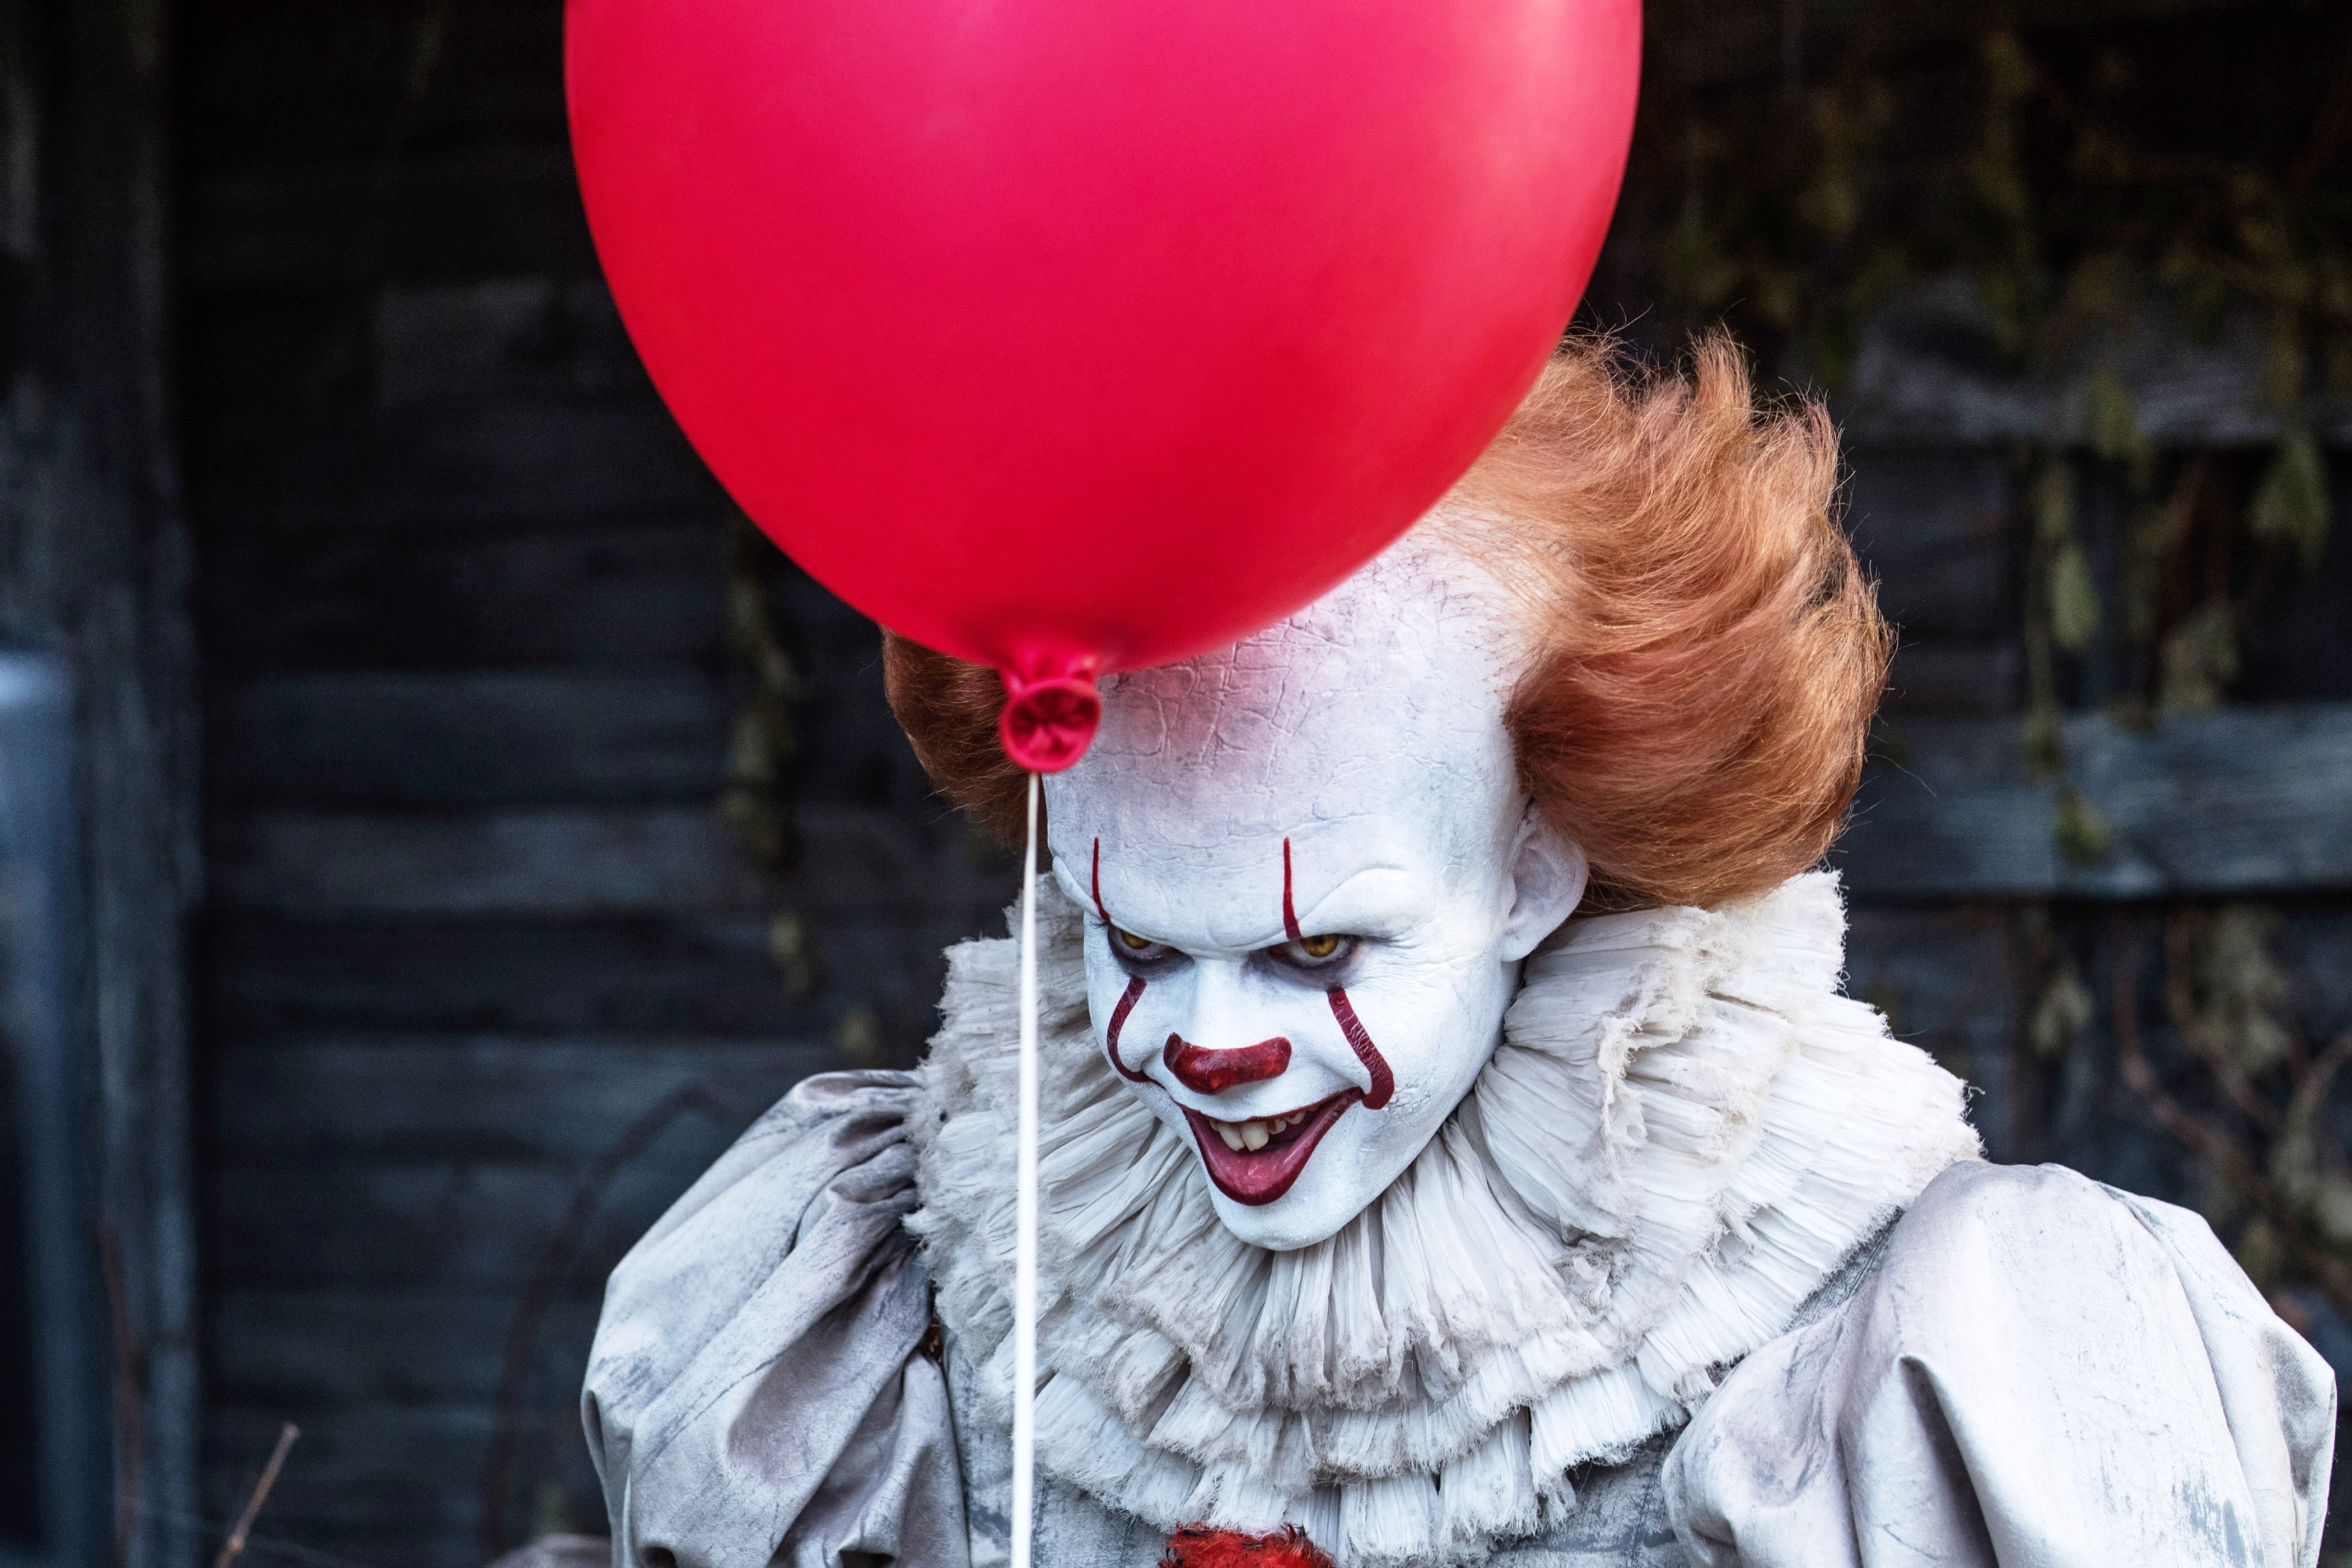 Bill Skarsgård Says ‘It’ Studio Was ‘Kind of Mean’ to Release First Pennywise Photo Before Filming as It Ignited...